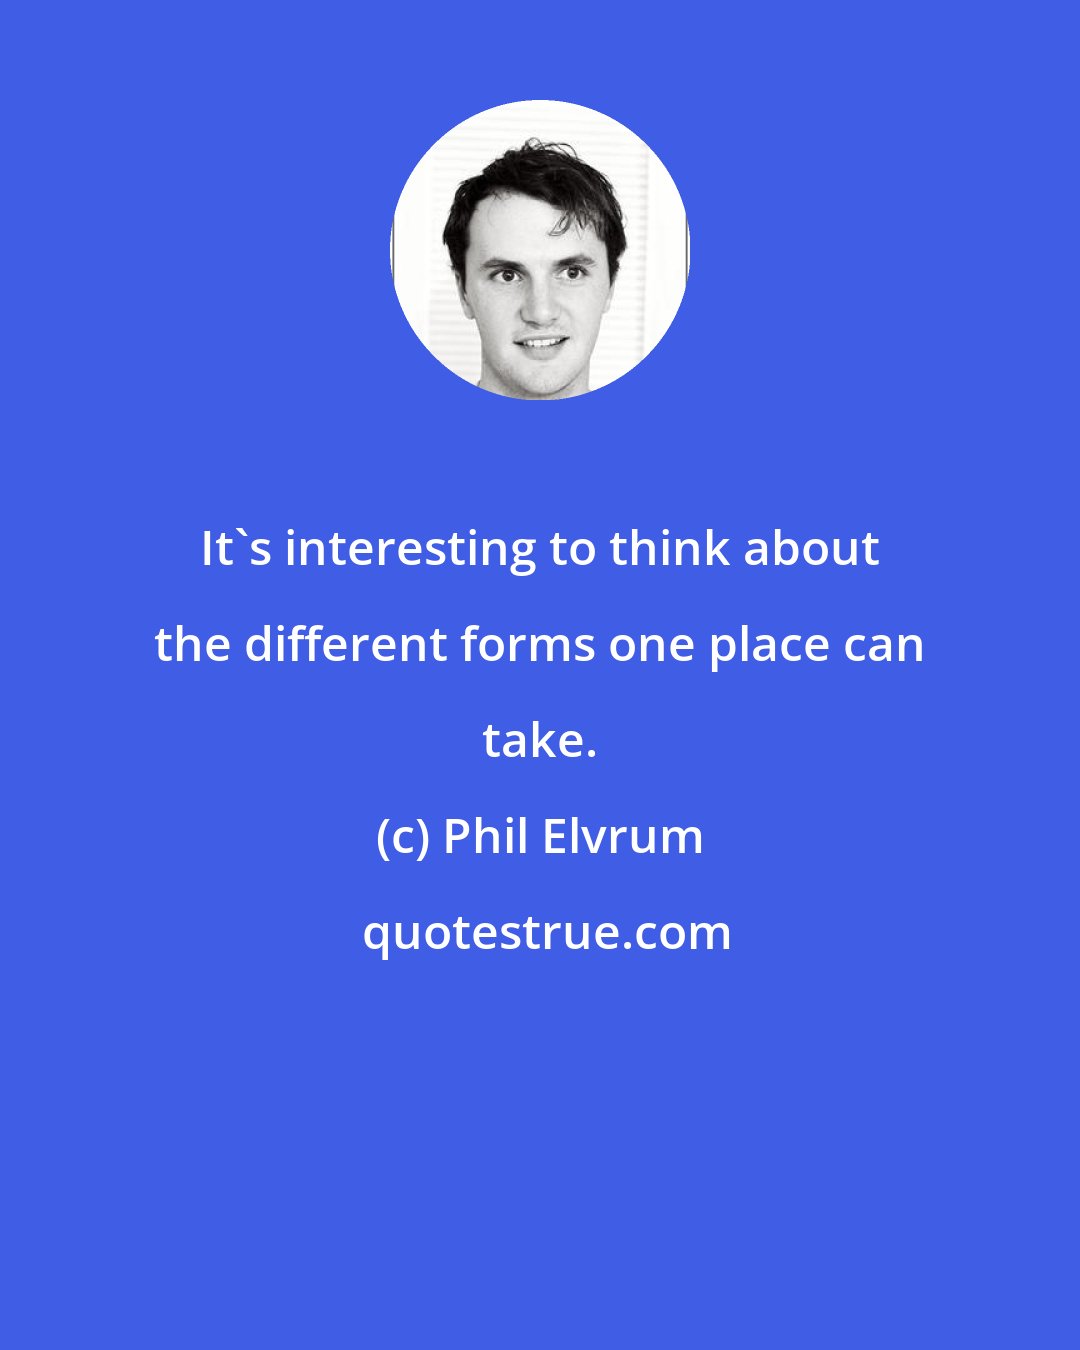 Phil Elvrum: It's interesting to think about the different forms one place can take.